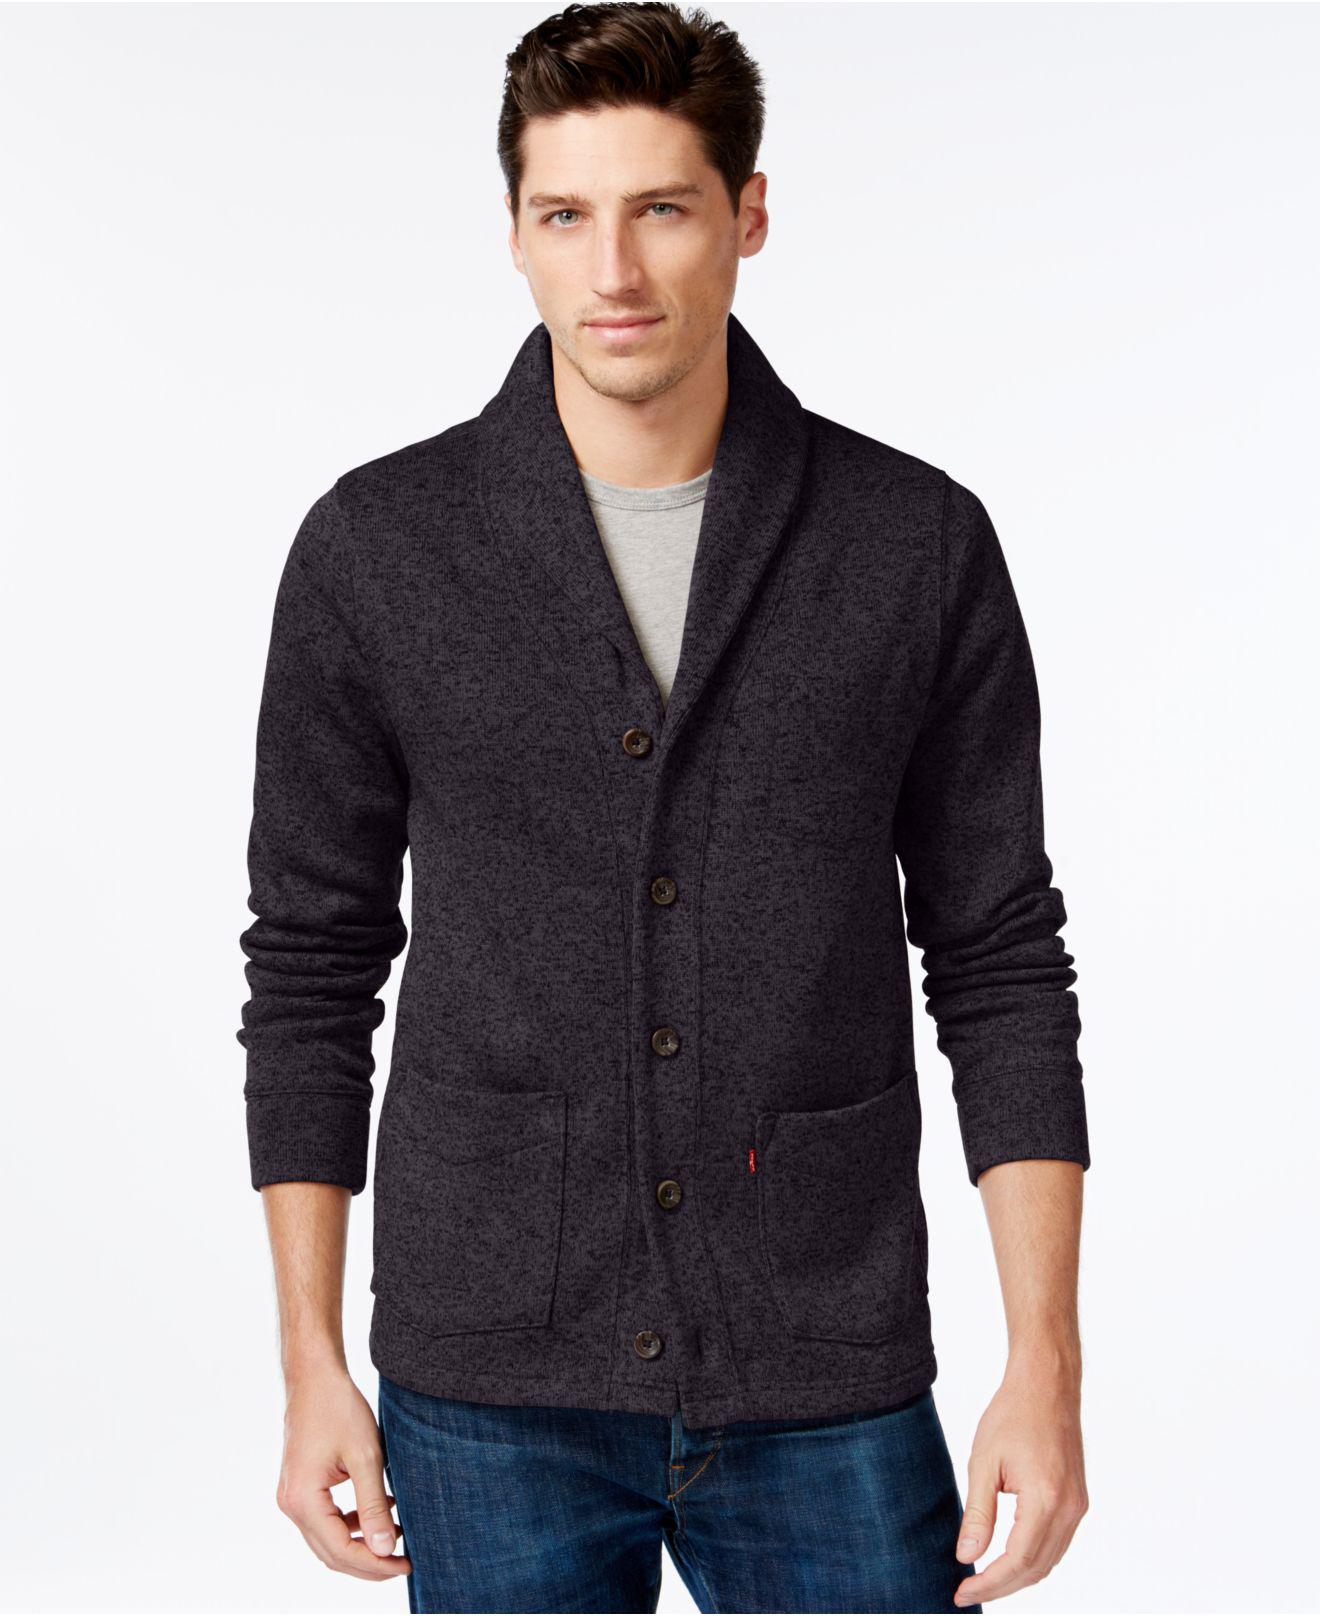 Levi's Synthetic Rand Shawl-collar Cardigan in Black for Men - Lyst